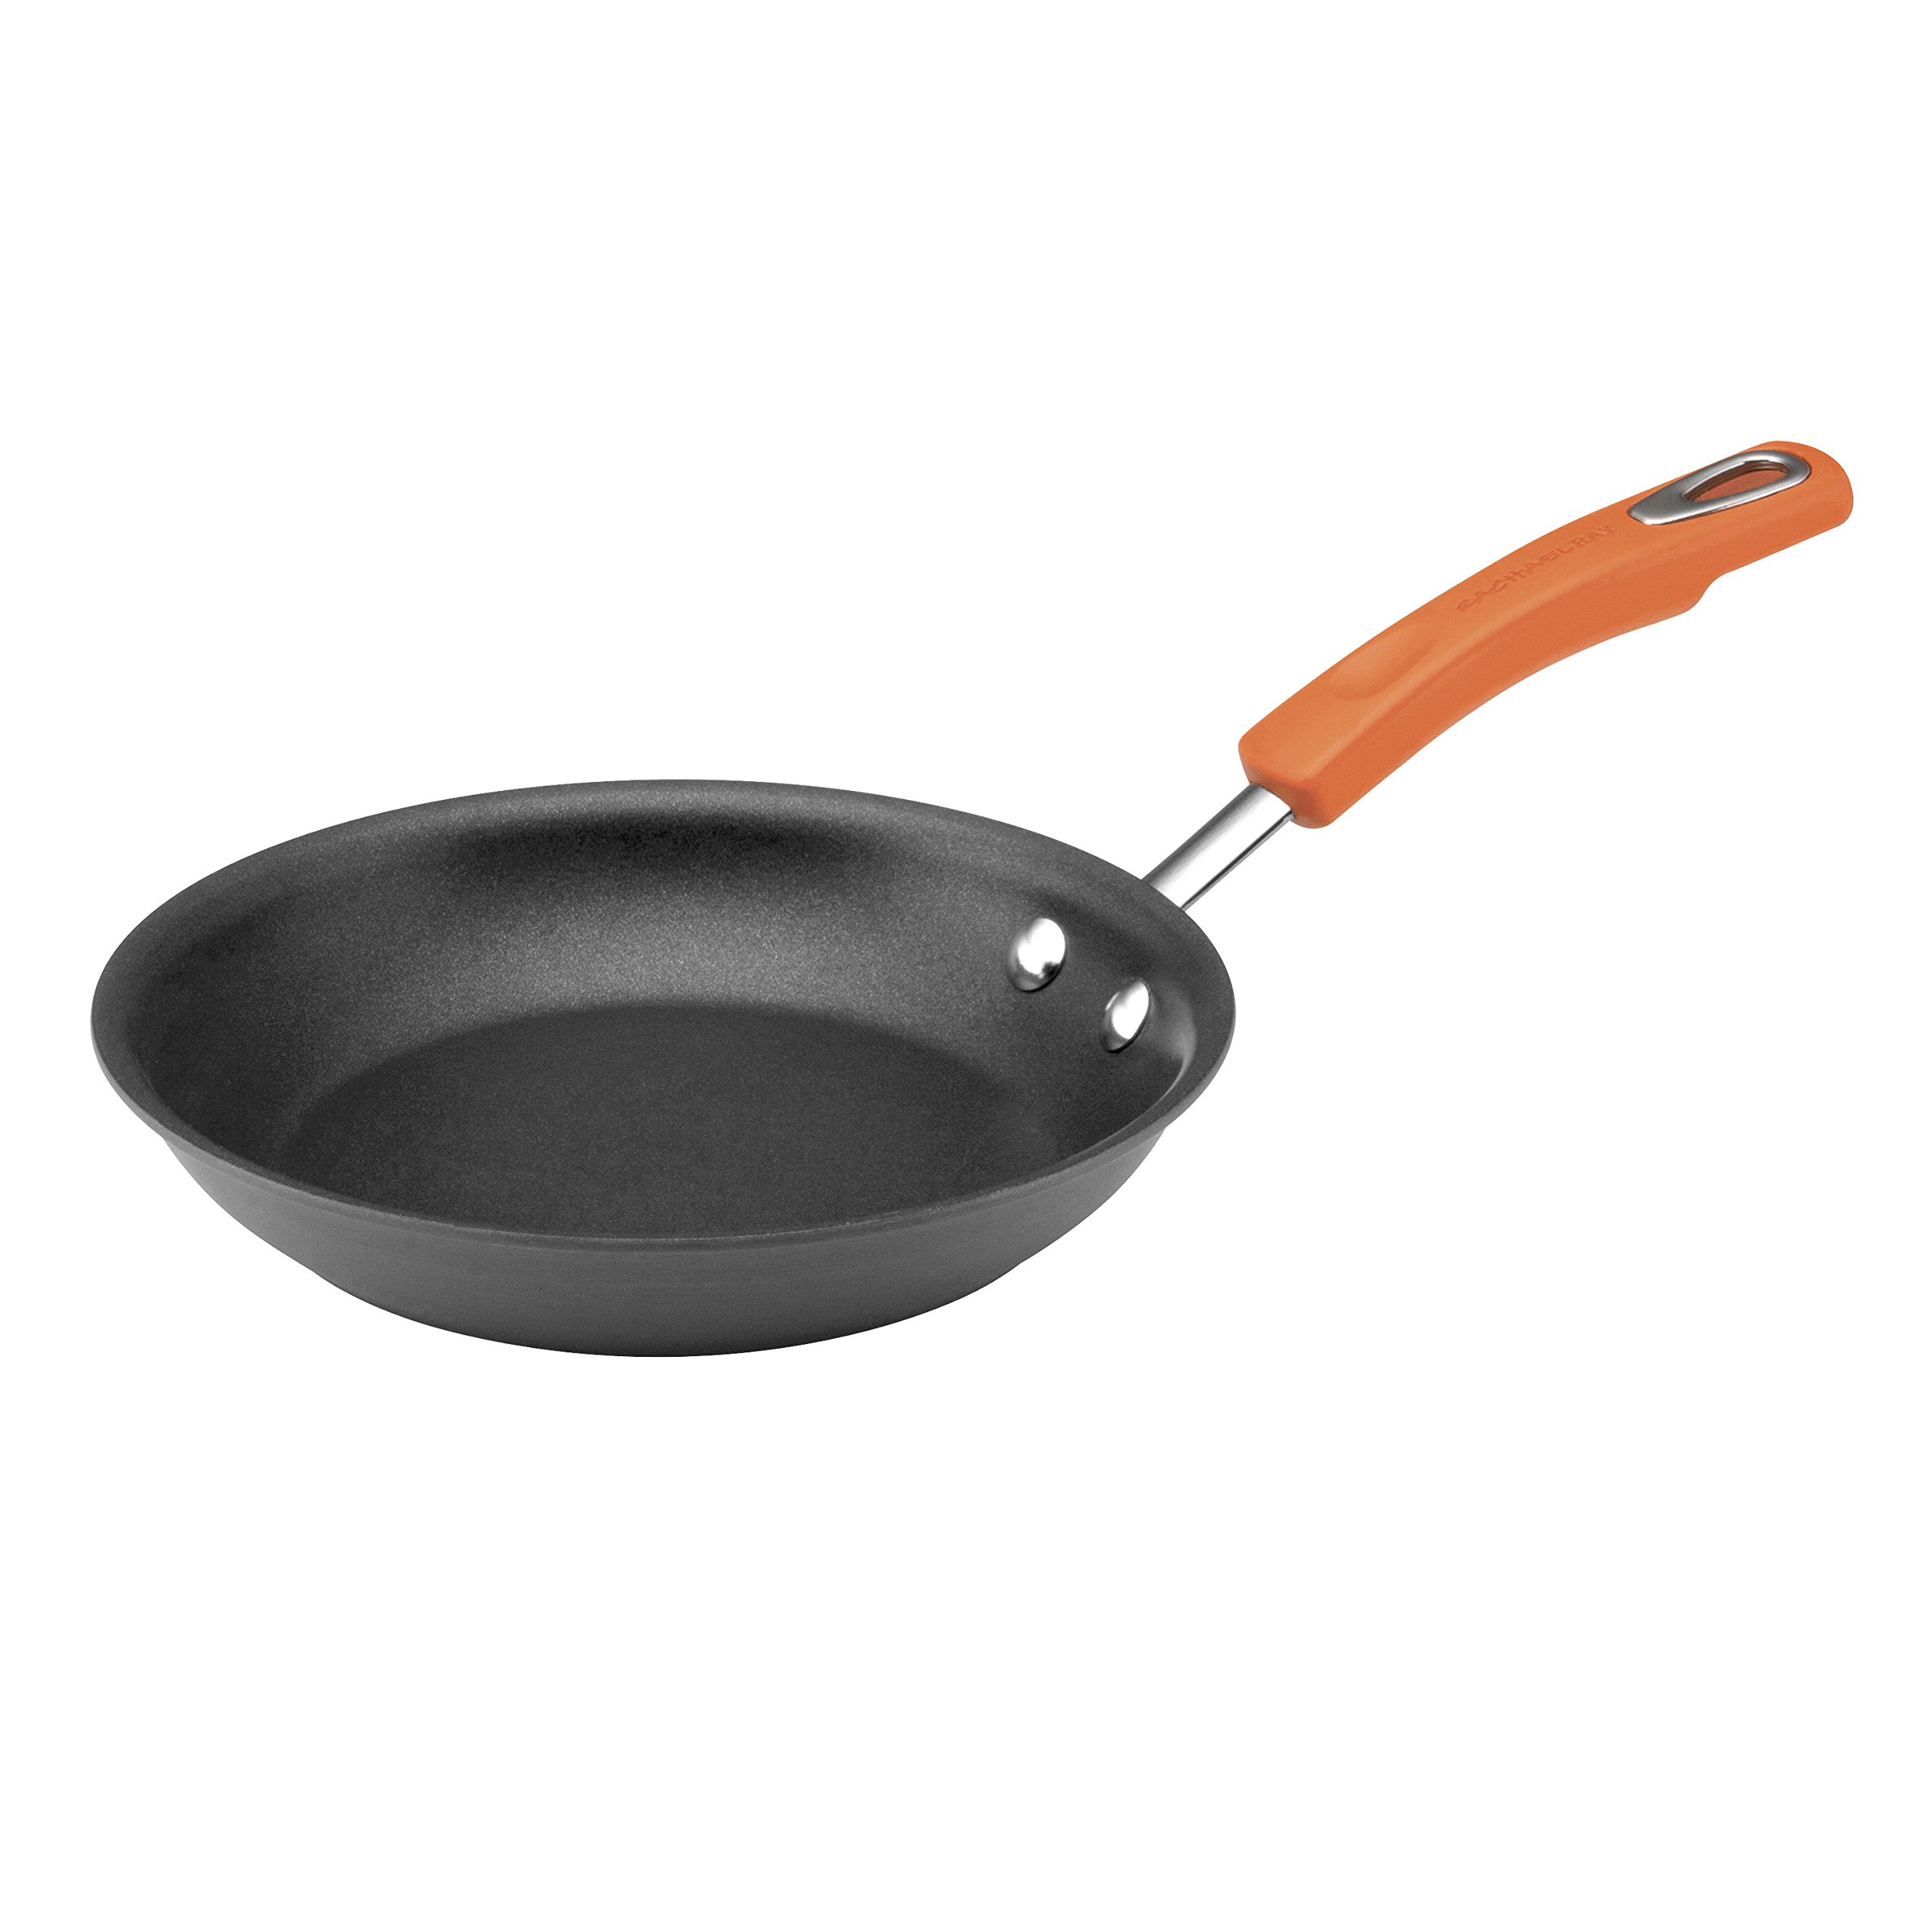 8.5" Rachael Ray Hard-Anodized Skillet (Gray/Orange) $10 + Free Shipping w/ Prime or on orders $35+